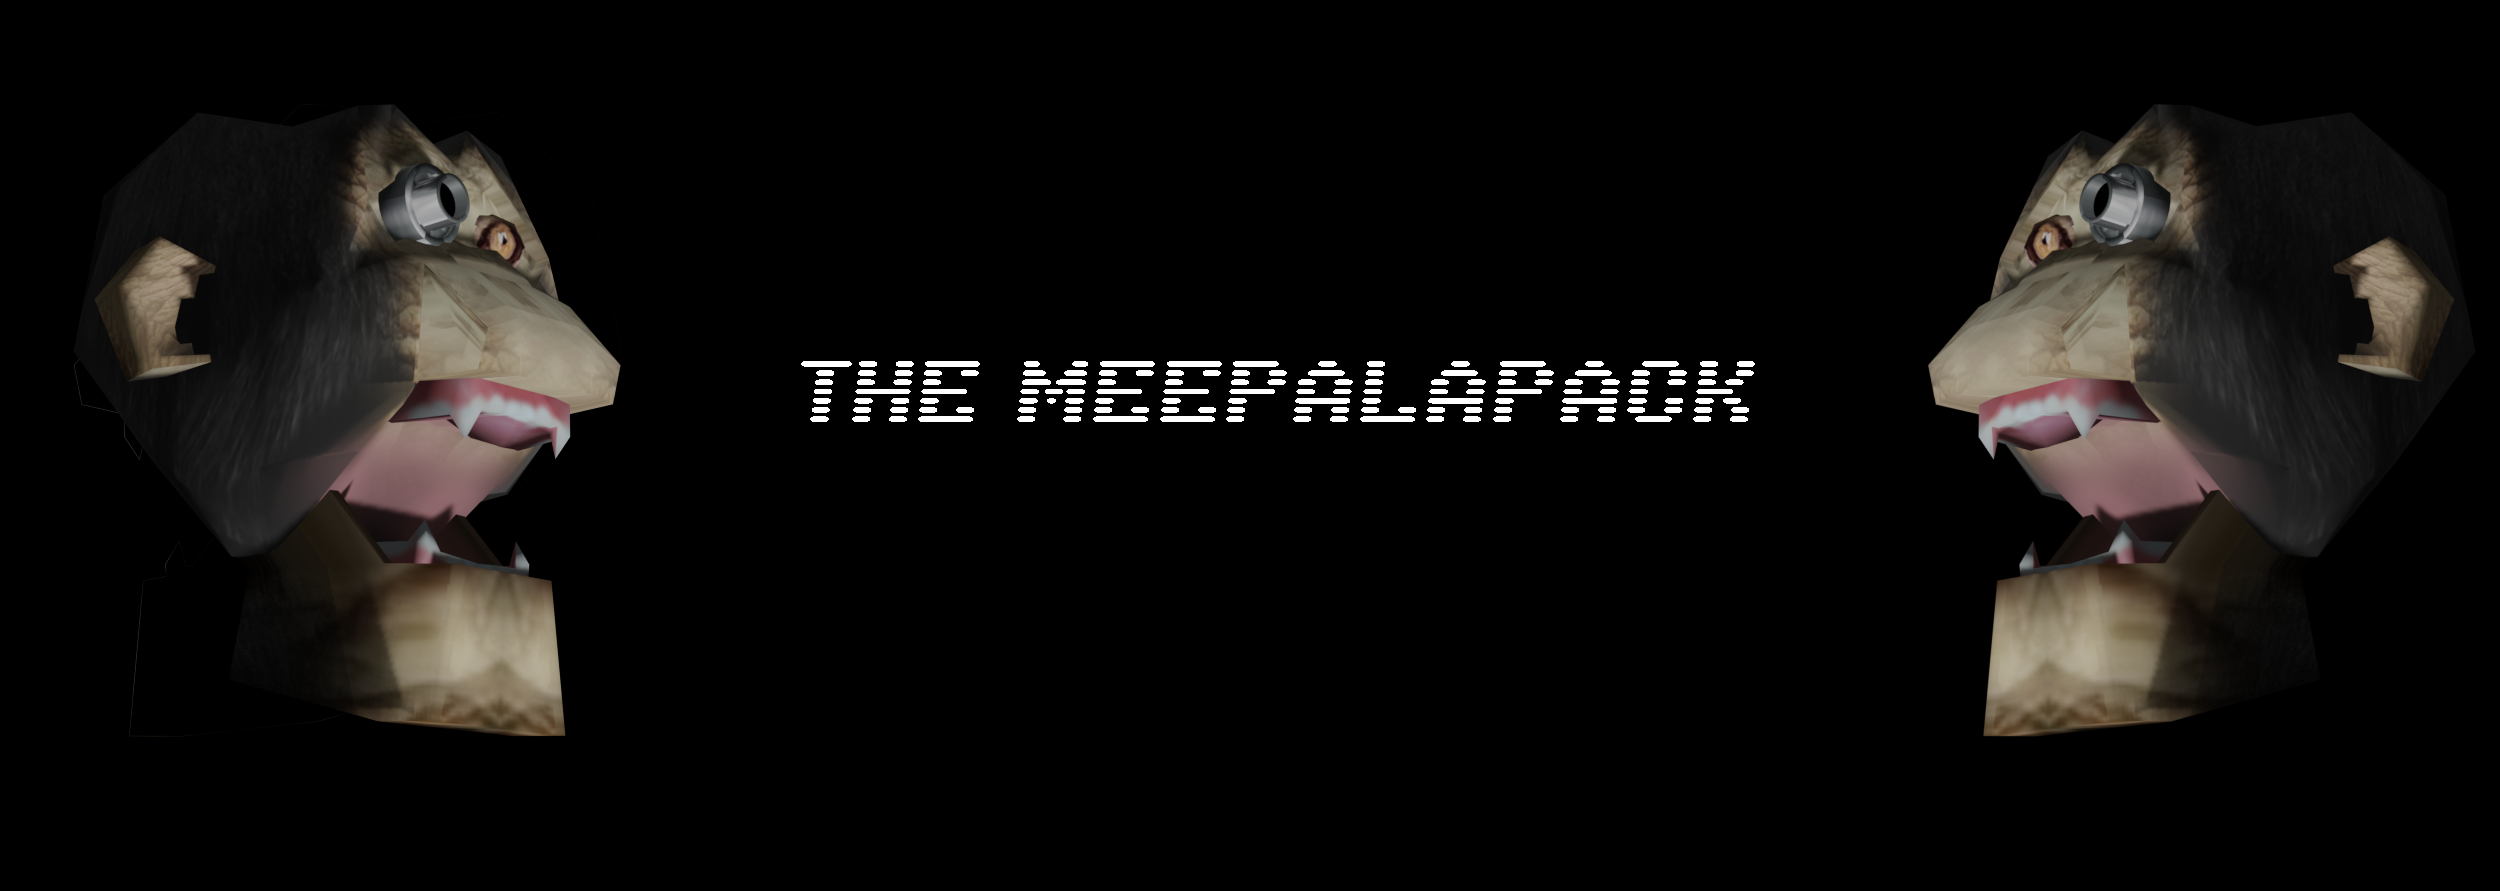 The Meepalapack